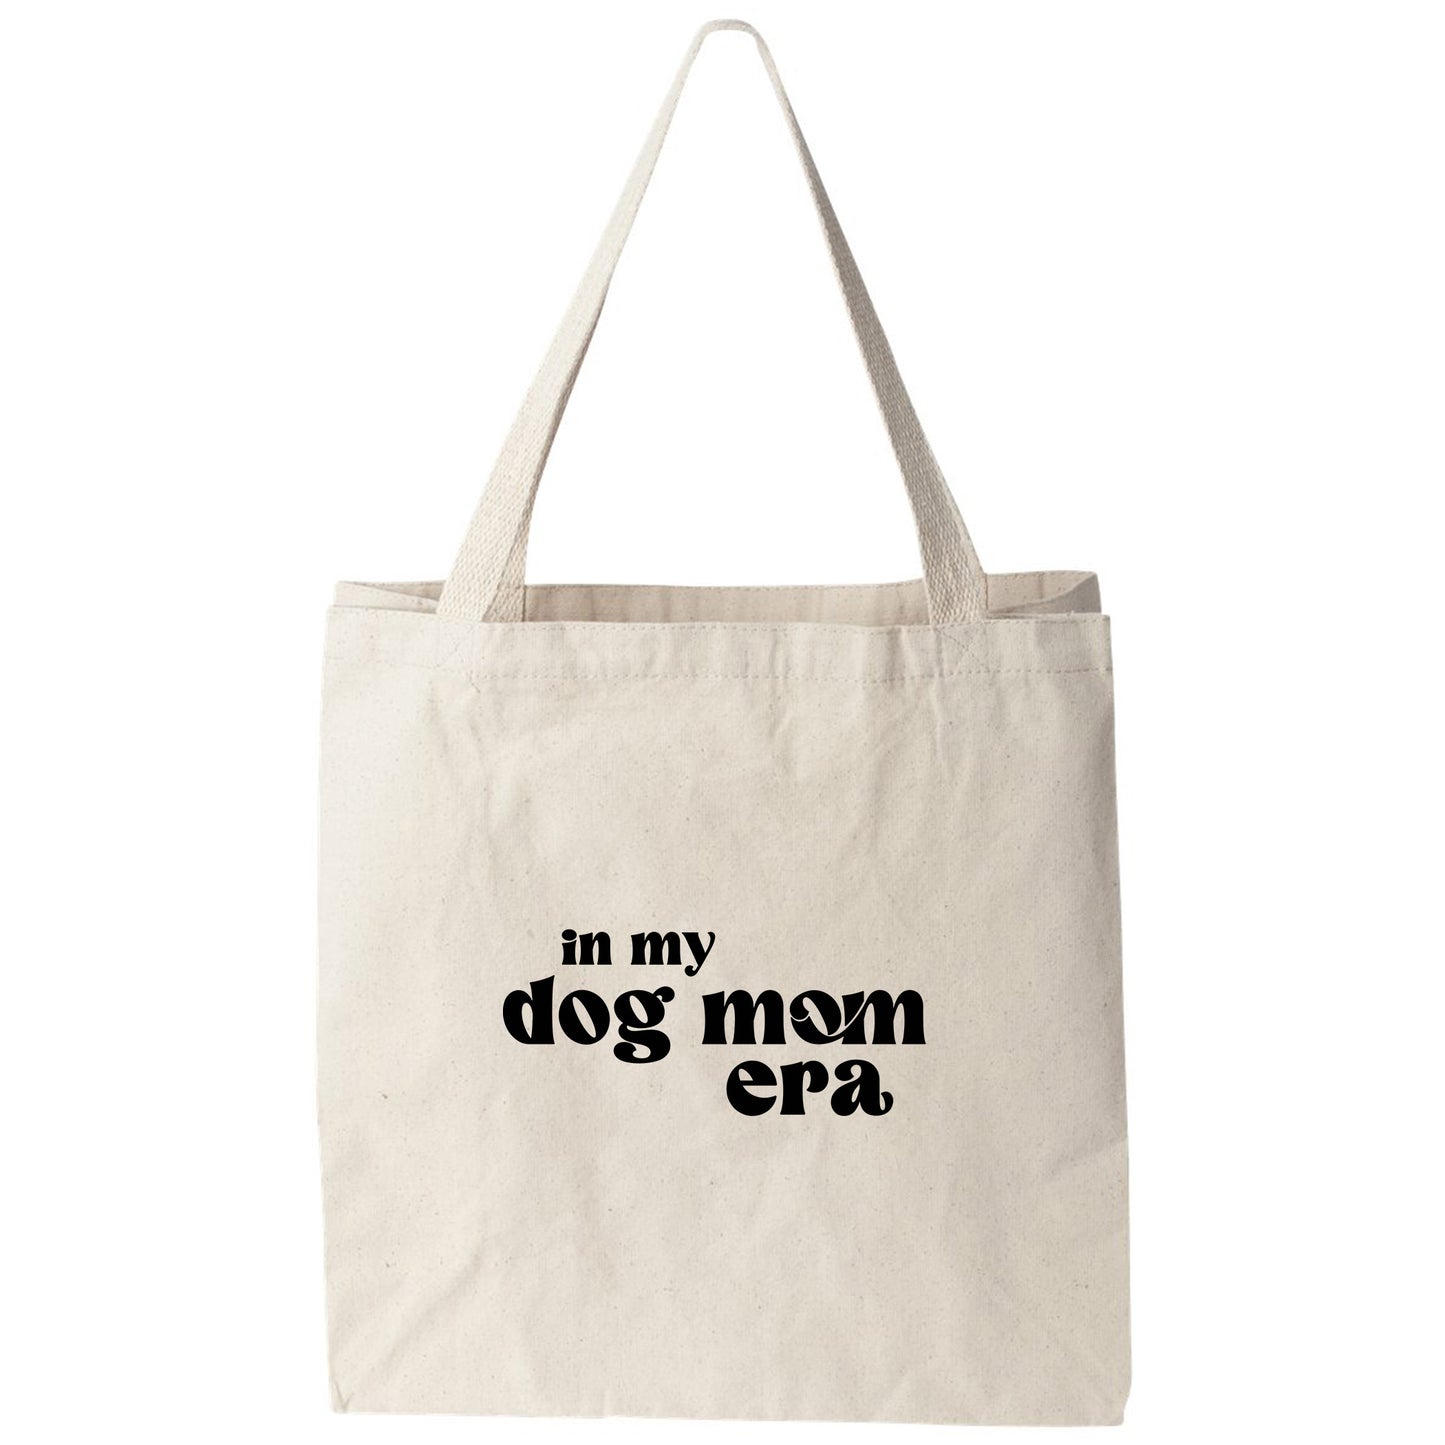 a tote bag that says in my dog mom era